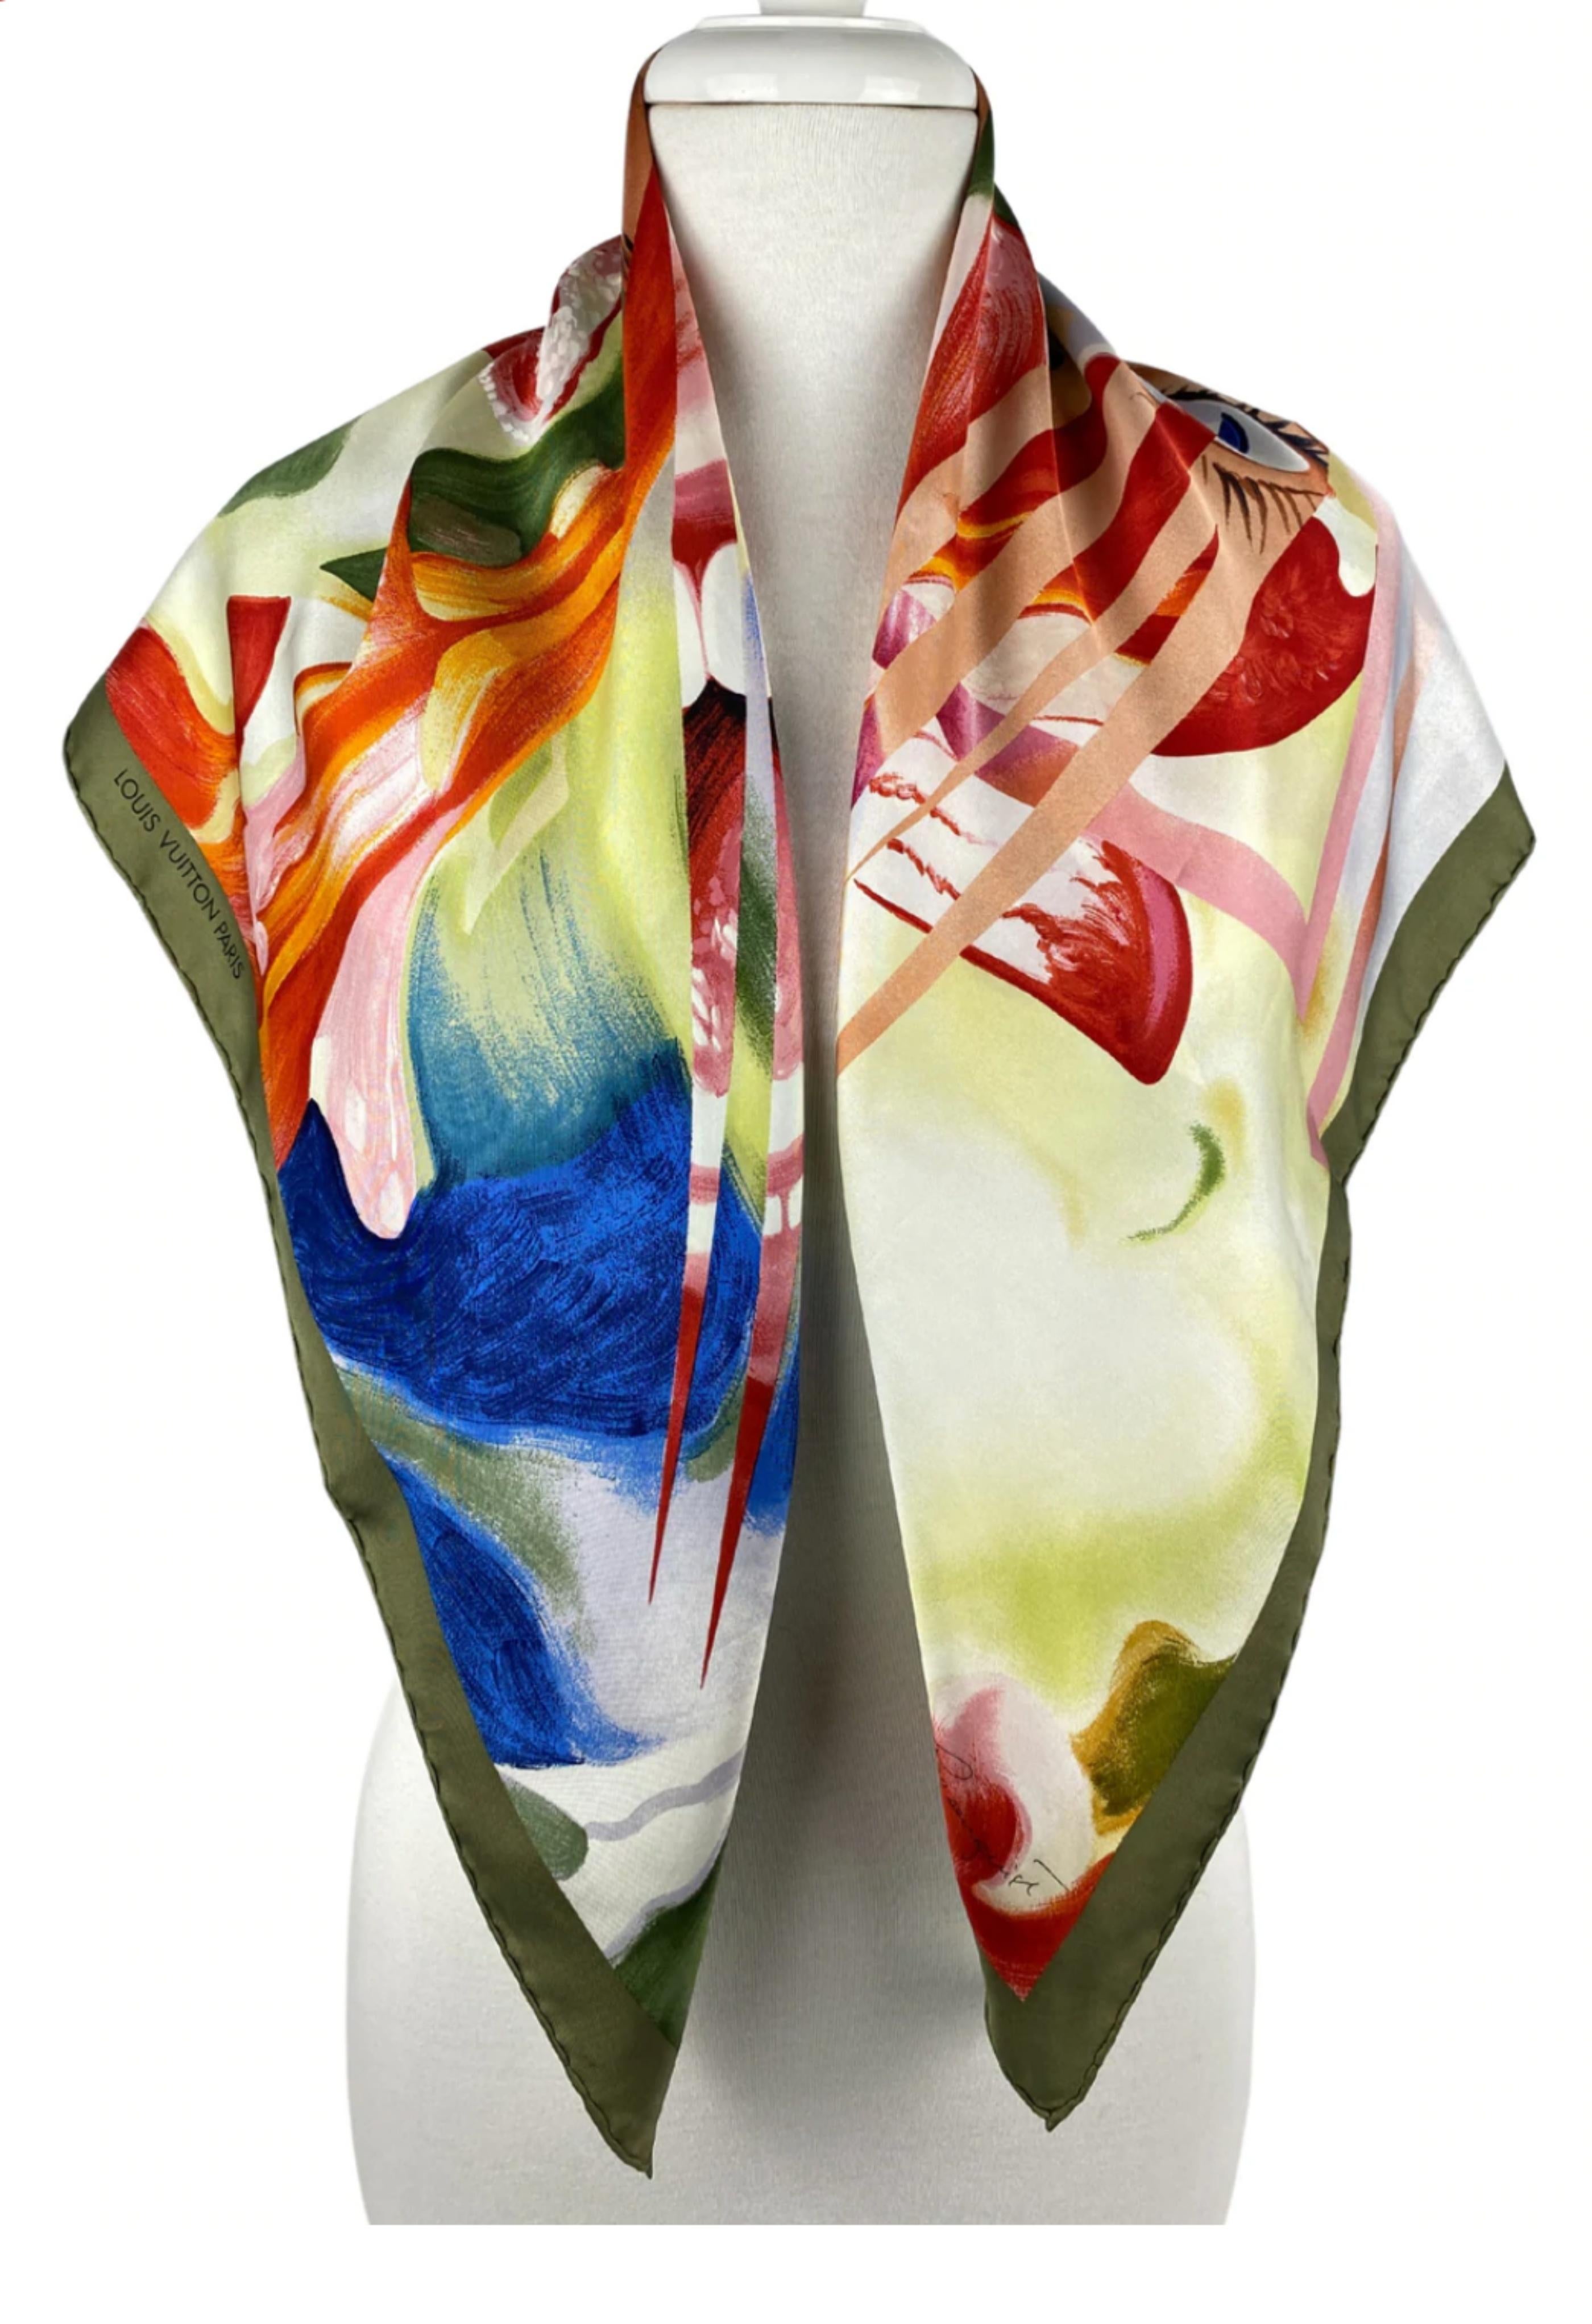  Louis Vuitton Limited Edition Silk Scarf designed by James Rosenquist For Sale 2